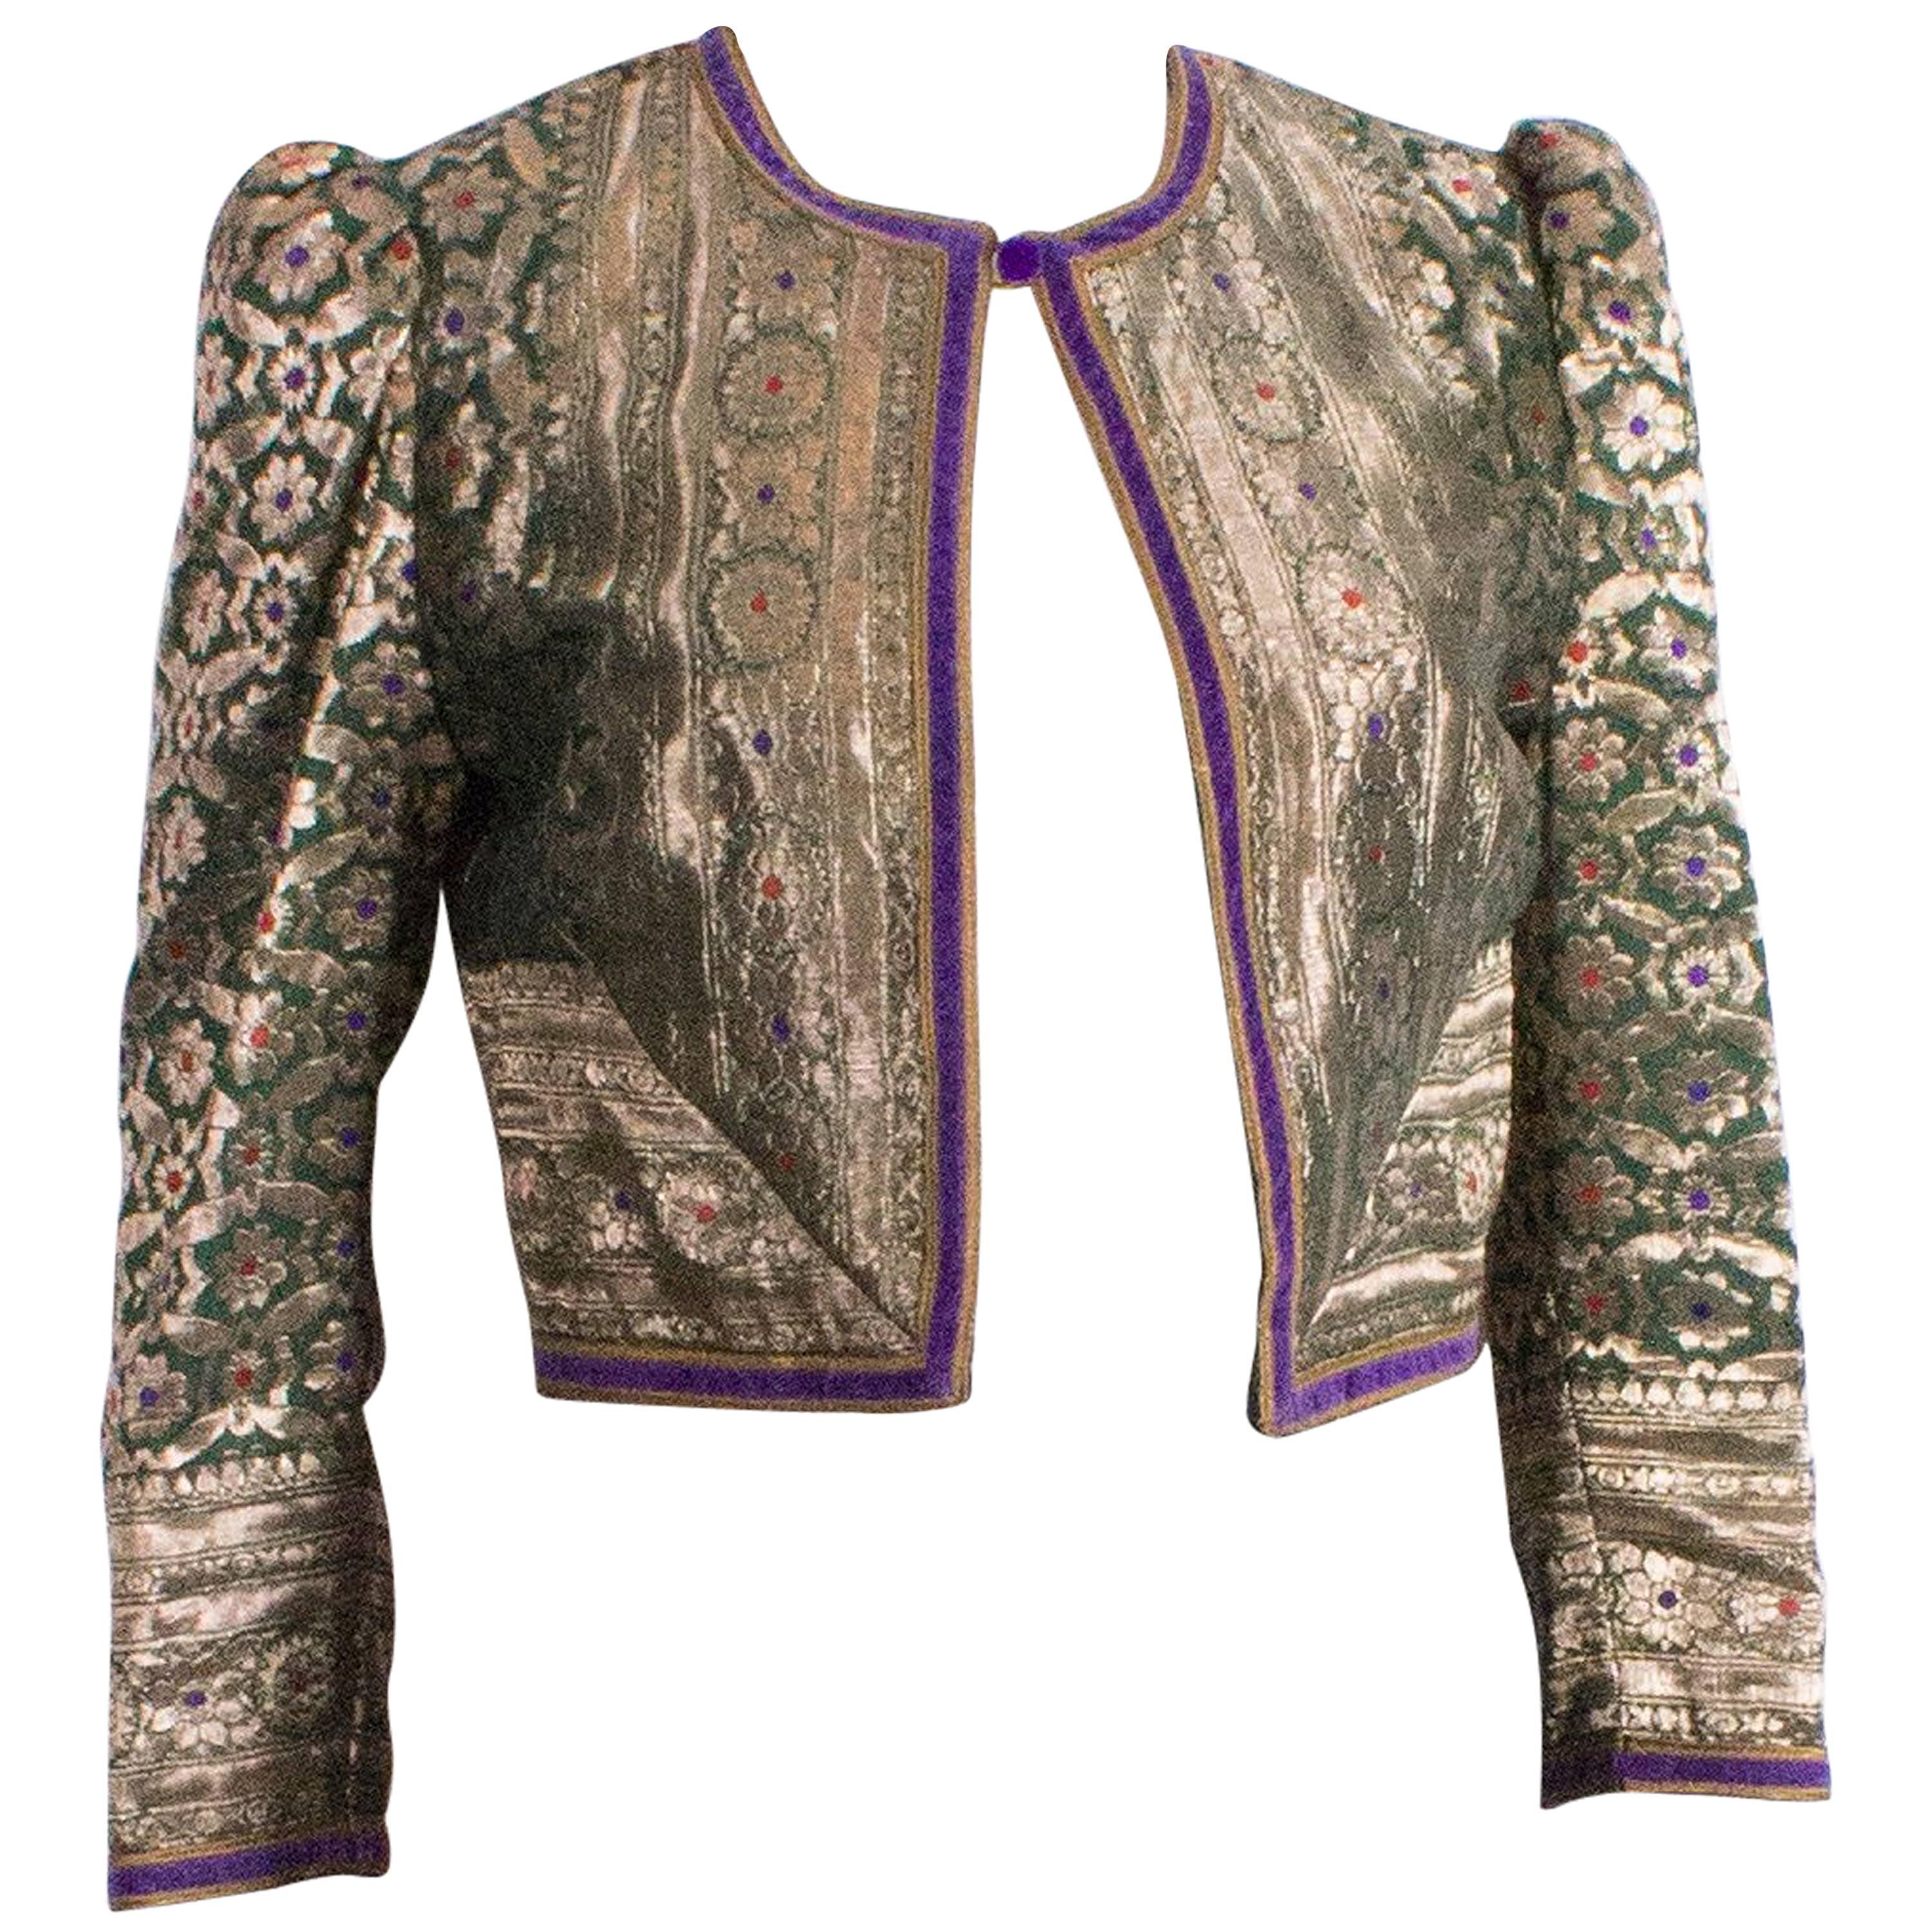 Regamus London Jacket in Gold Thread with Floral Pattern